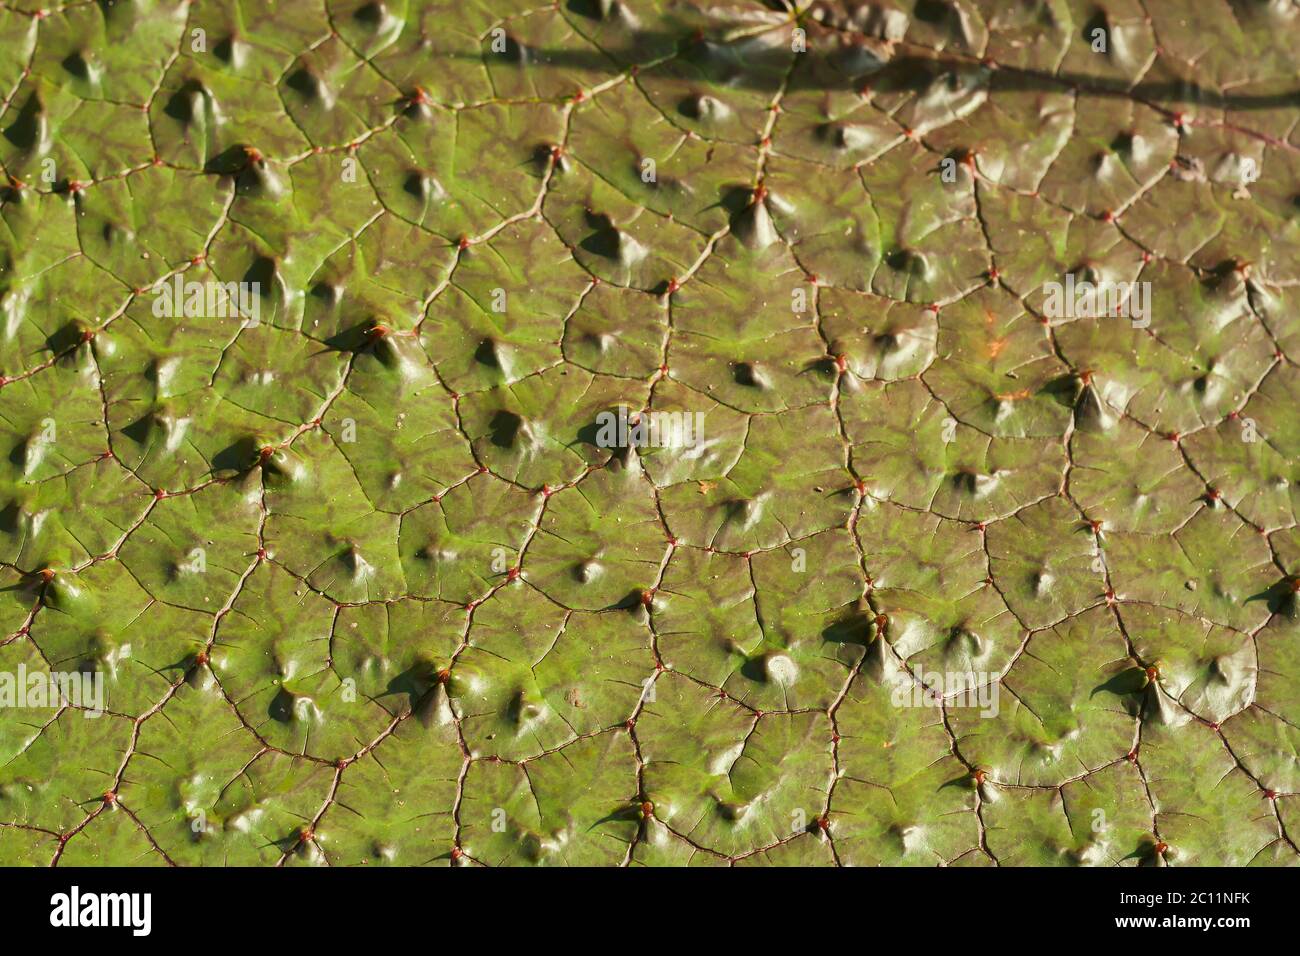 Prickly waterlily green floating leaves close up Stock Photo